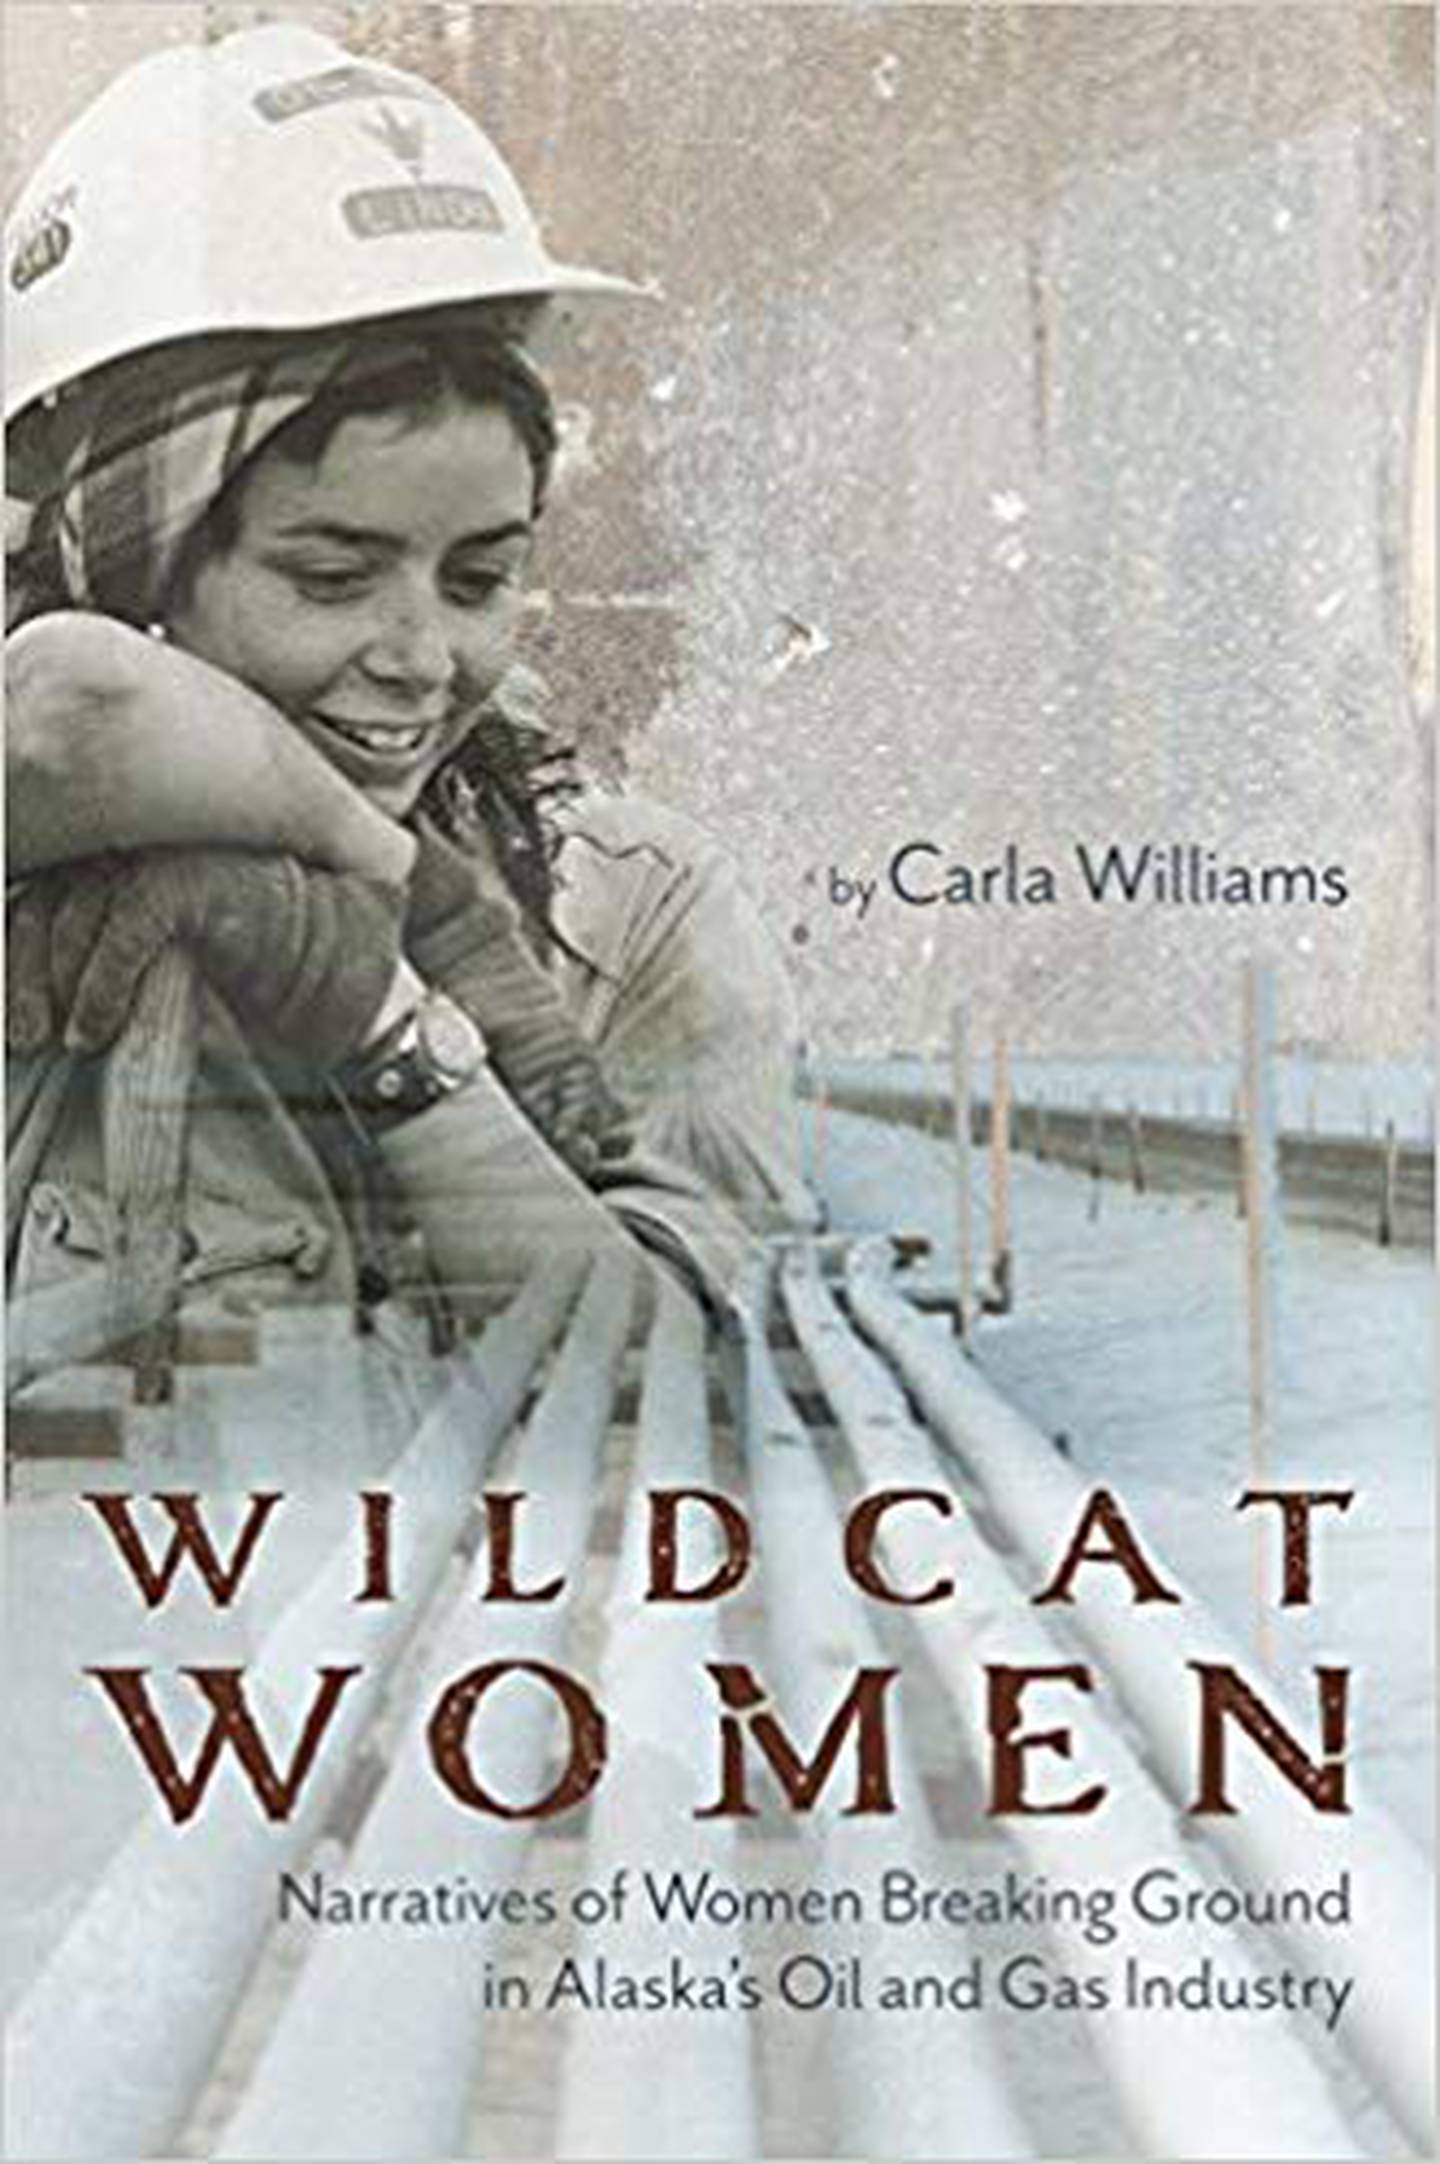 Book review, "Wildcat Women: Narratives of Women Breaking Ground in Alaska’s Oil and Gas Industry" by Carla Williams